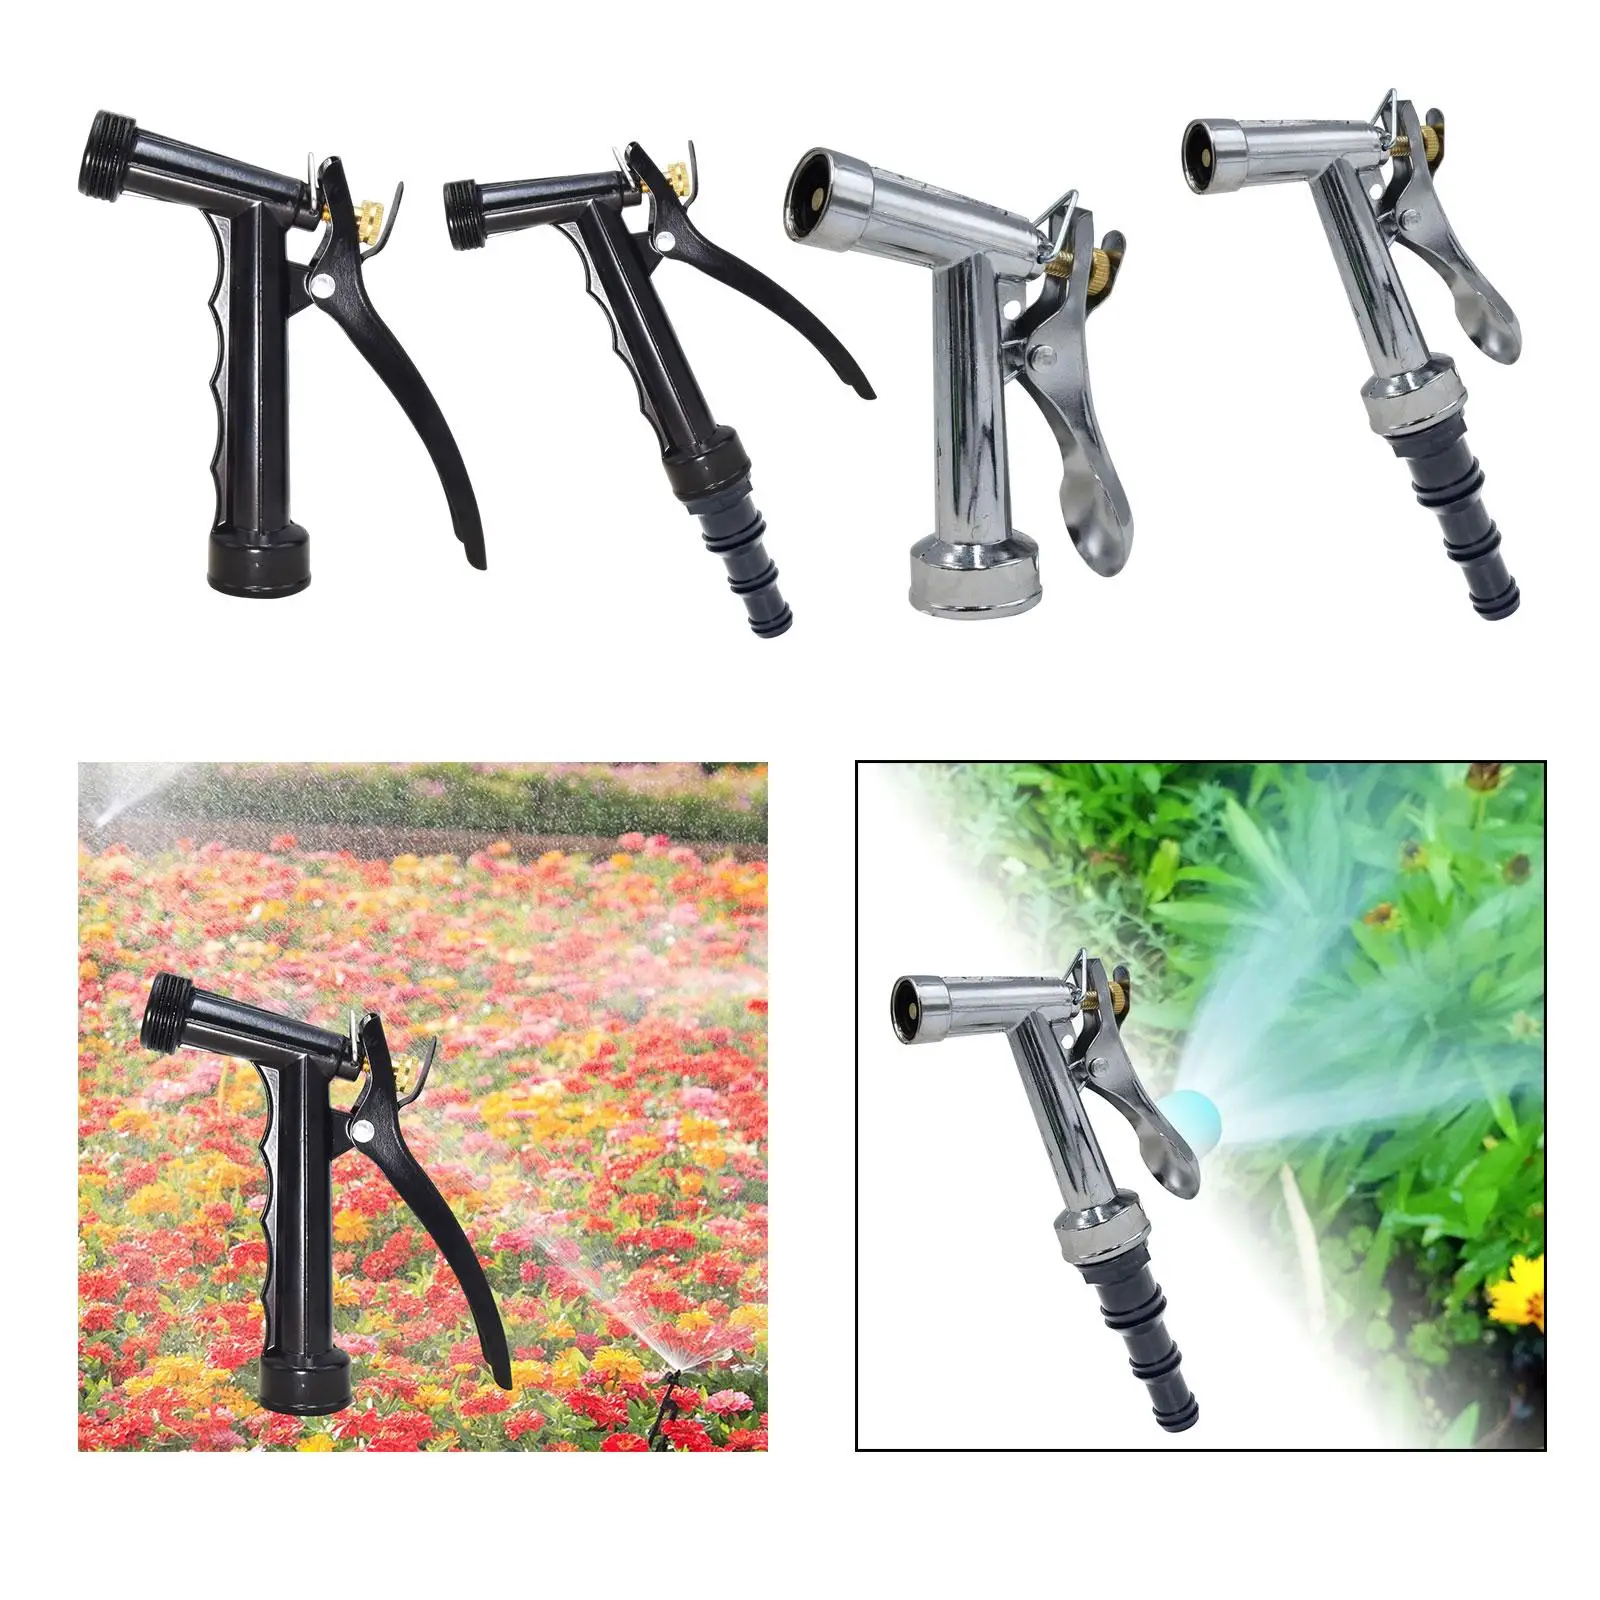 Metal Garden Watering Nozzle Non Slip High Pressure Spray Nozzle for Driveway Flowers Watering Yard Pets Showering Lawns